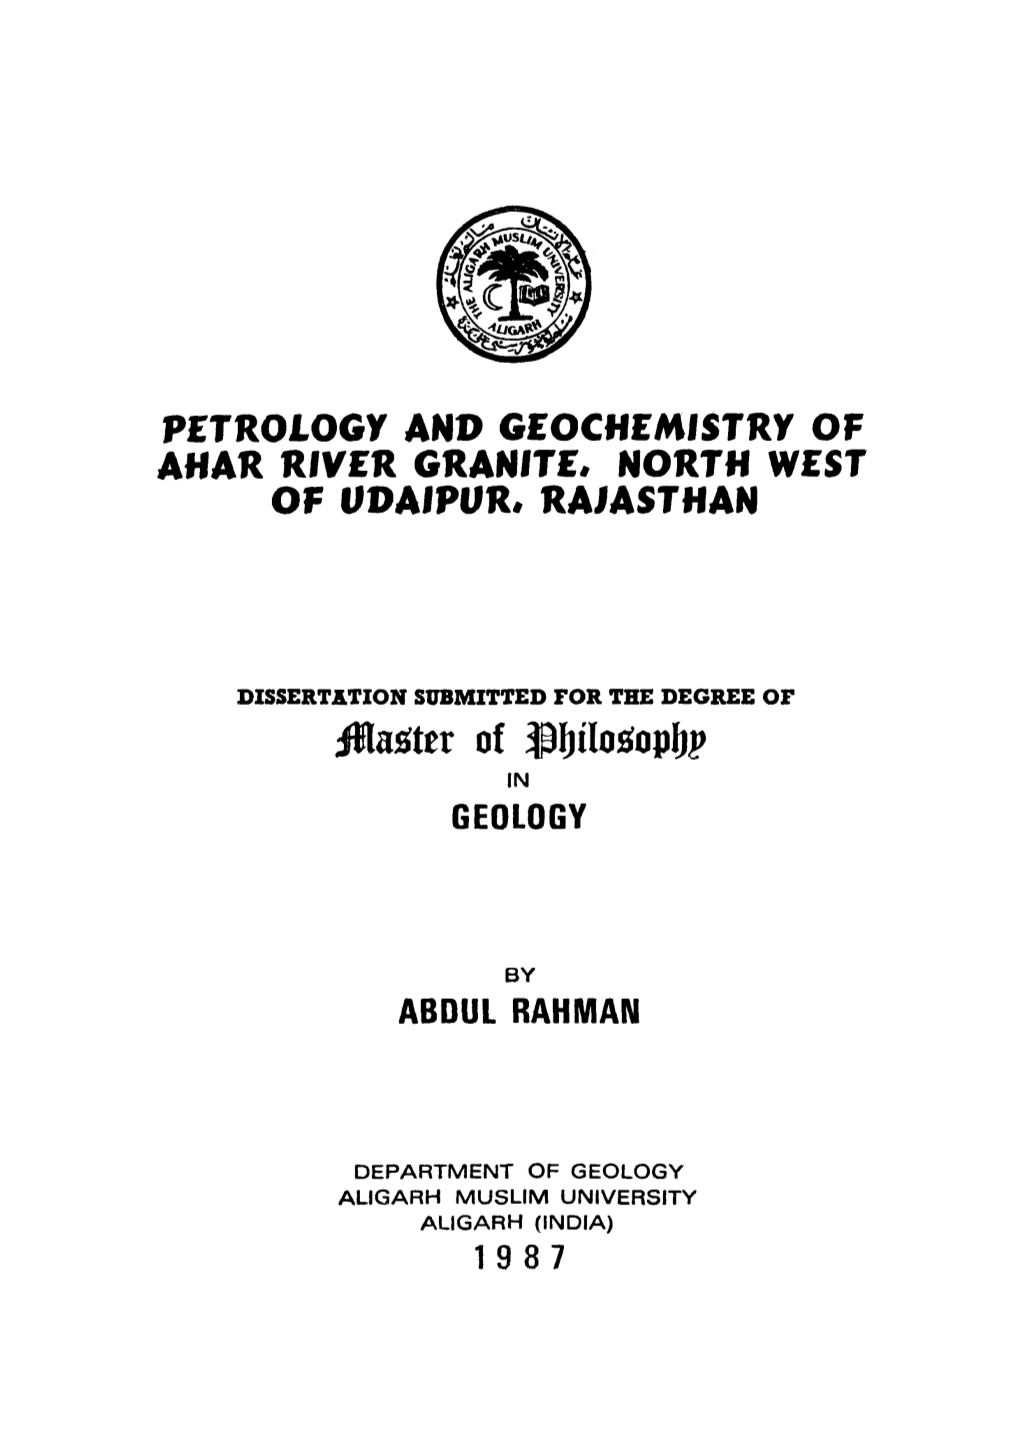 Petroiogy and Geochemfstry of AHAR RIVER GRANITE* NORTH WEST of Uoafpur